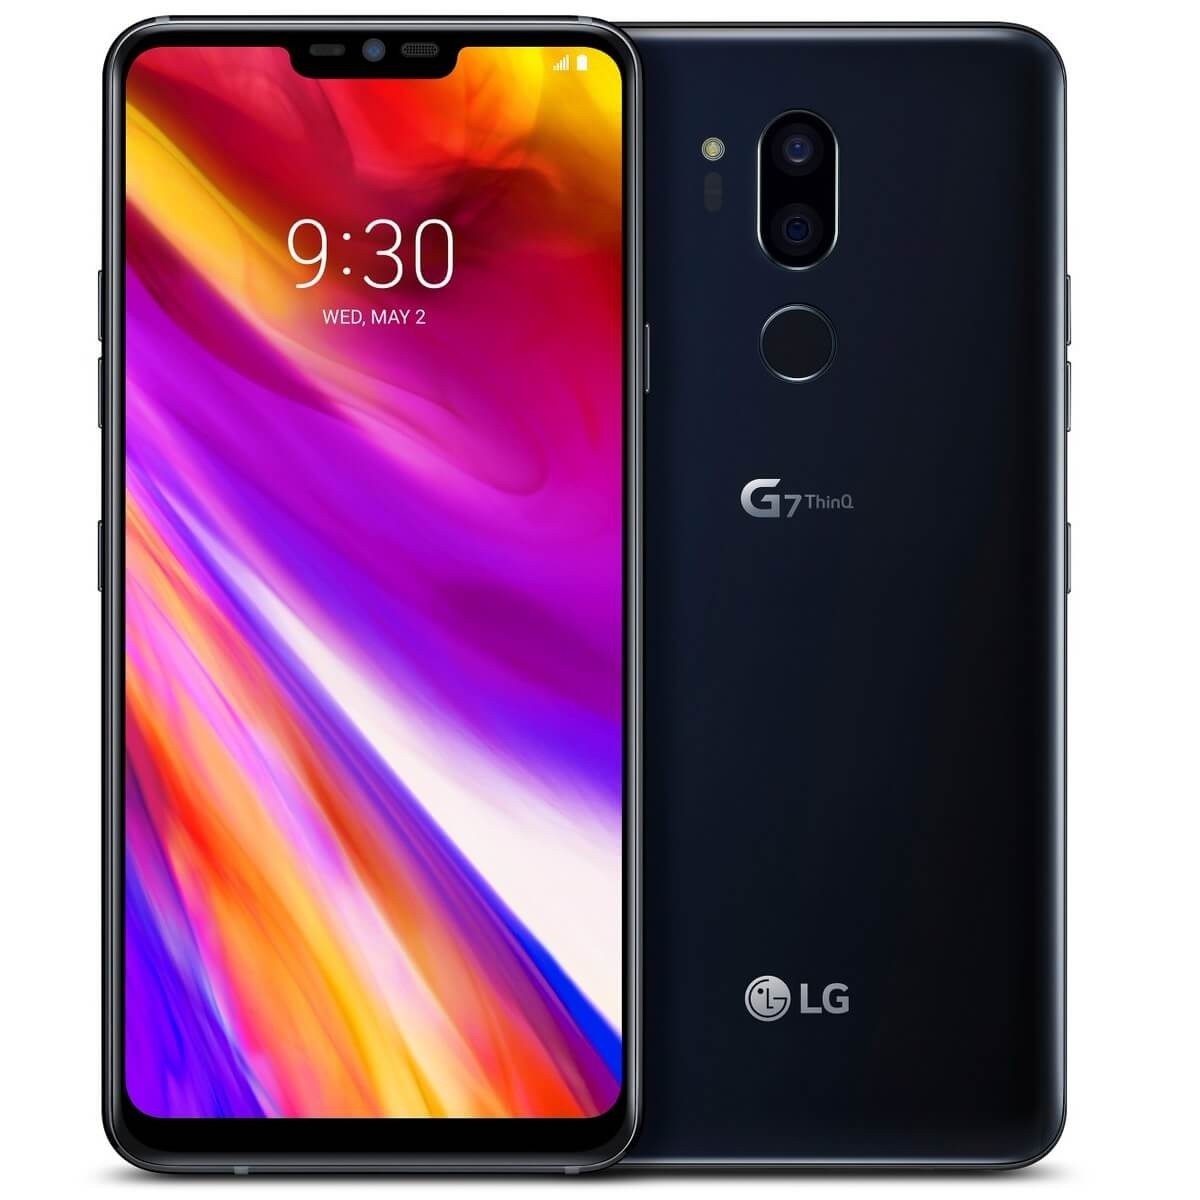 LG Phones 2019 - LG G7 ThinQ Review Specifications - Latest Android Phones 2019 | The Best ...